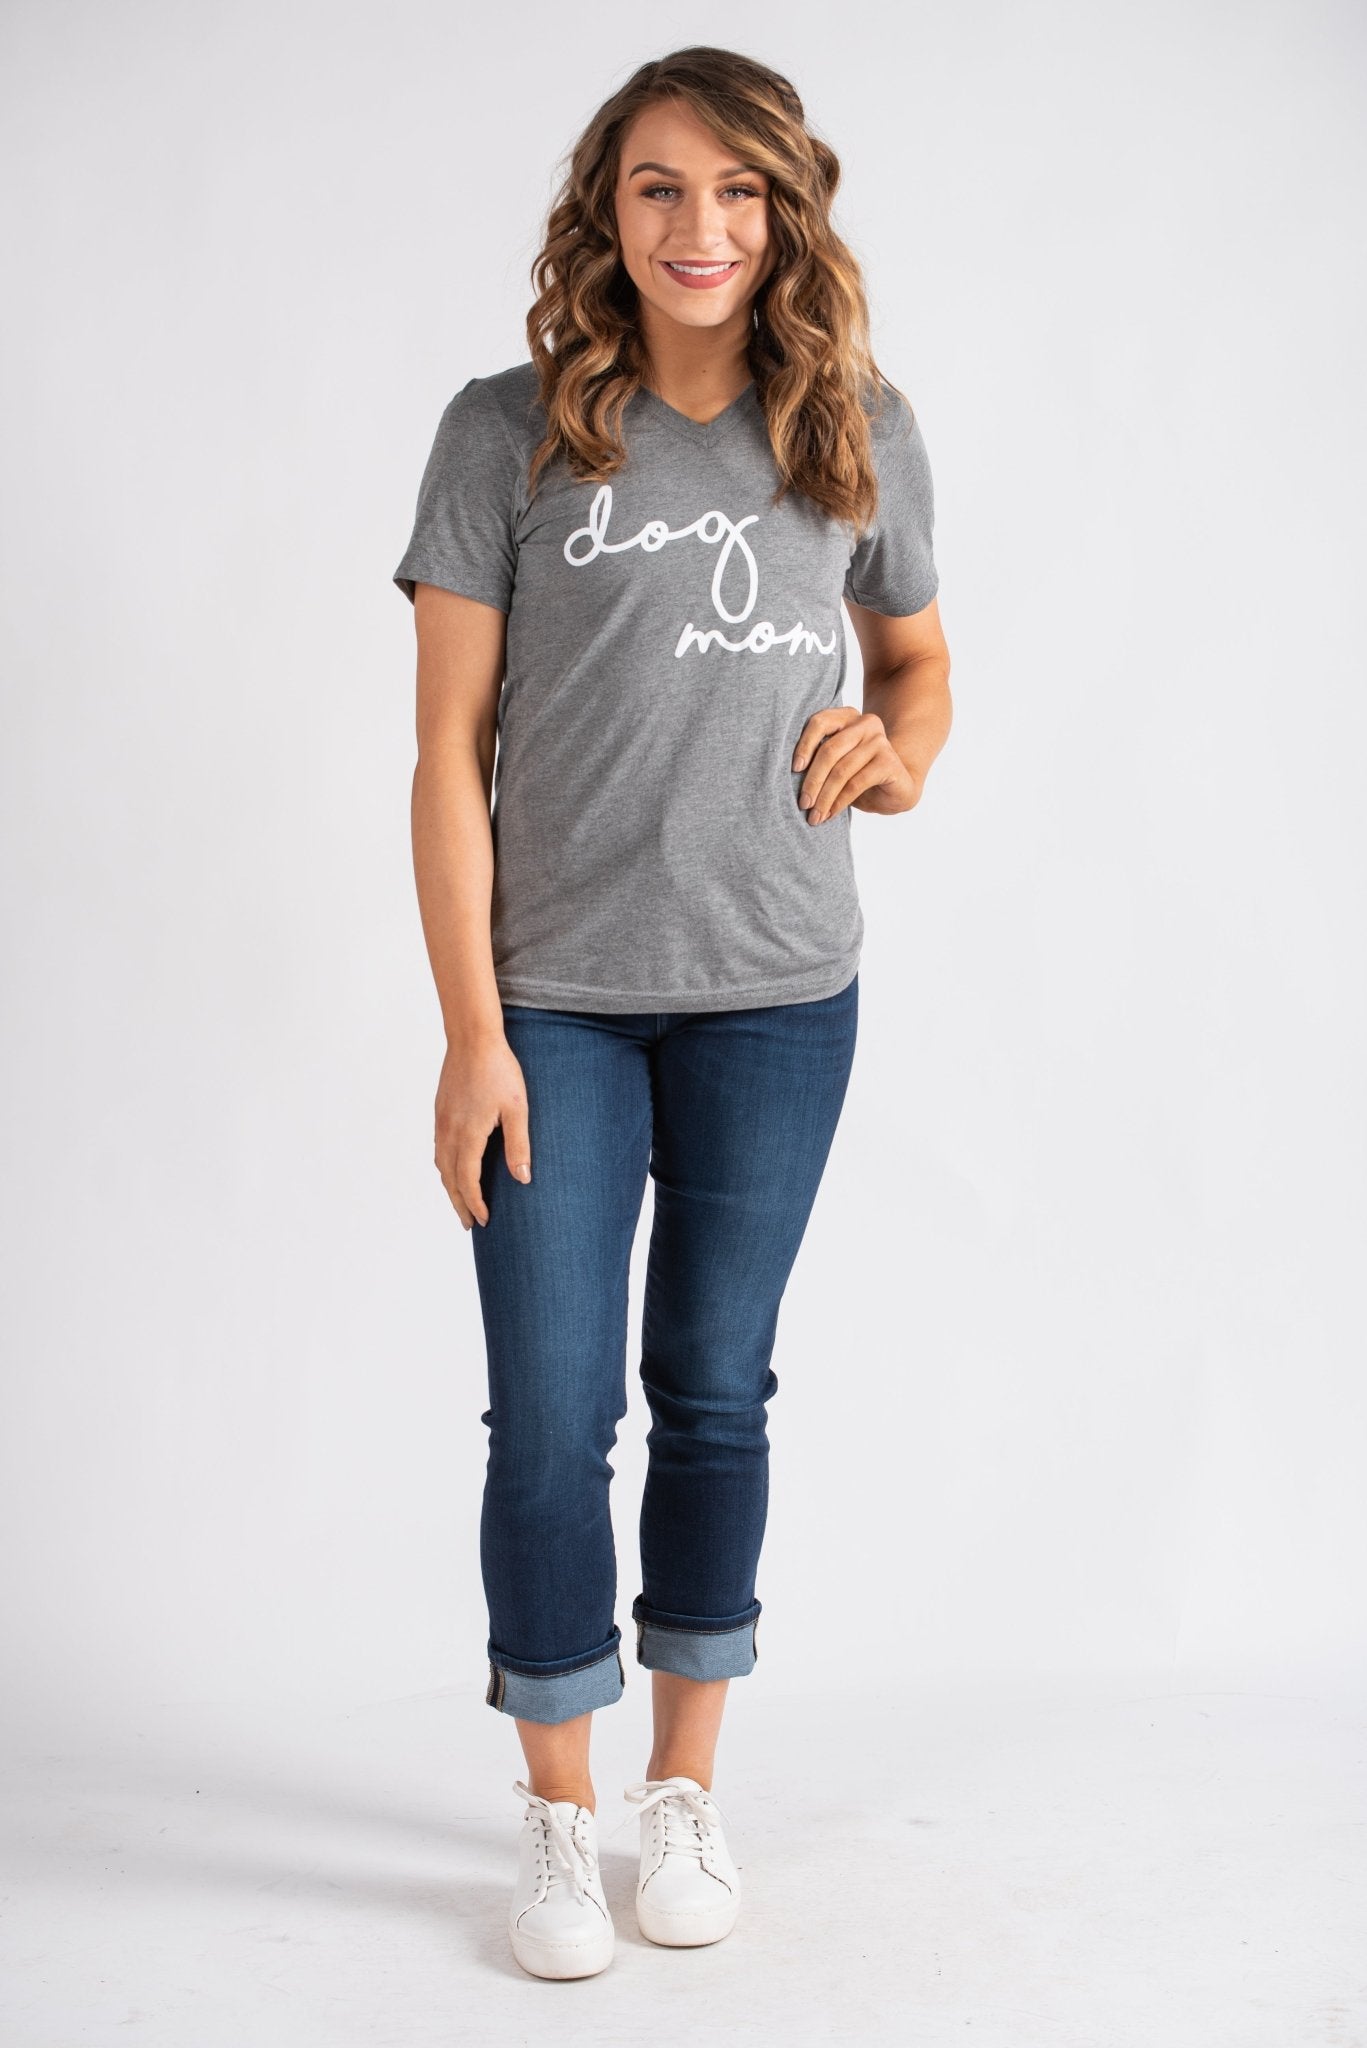 Dog Mom script unisex short sleeve v-neck t-shirt grey - Trendy Sweaters - Cute Graphic Tee Fashion at Lush Fashion Lounge Boutique in Oklahoma